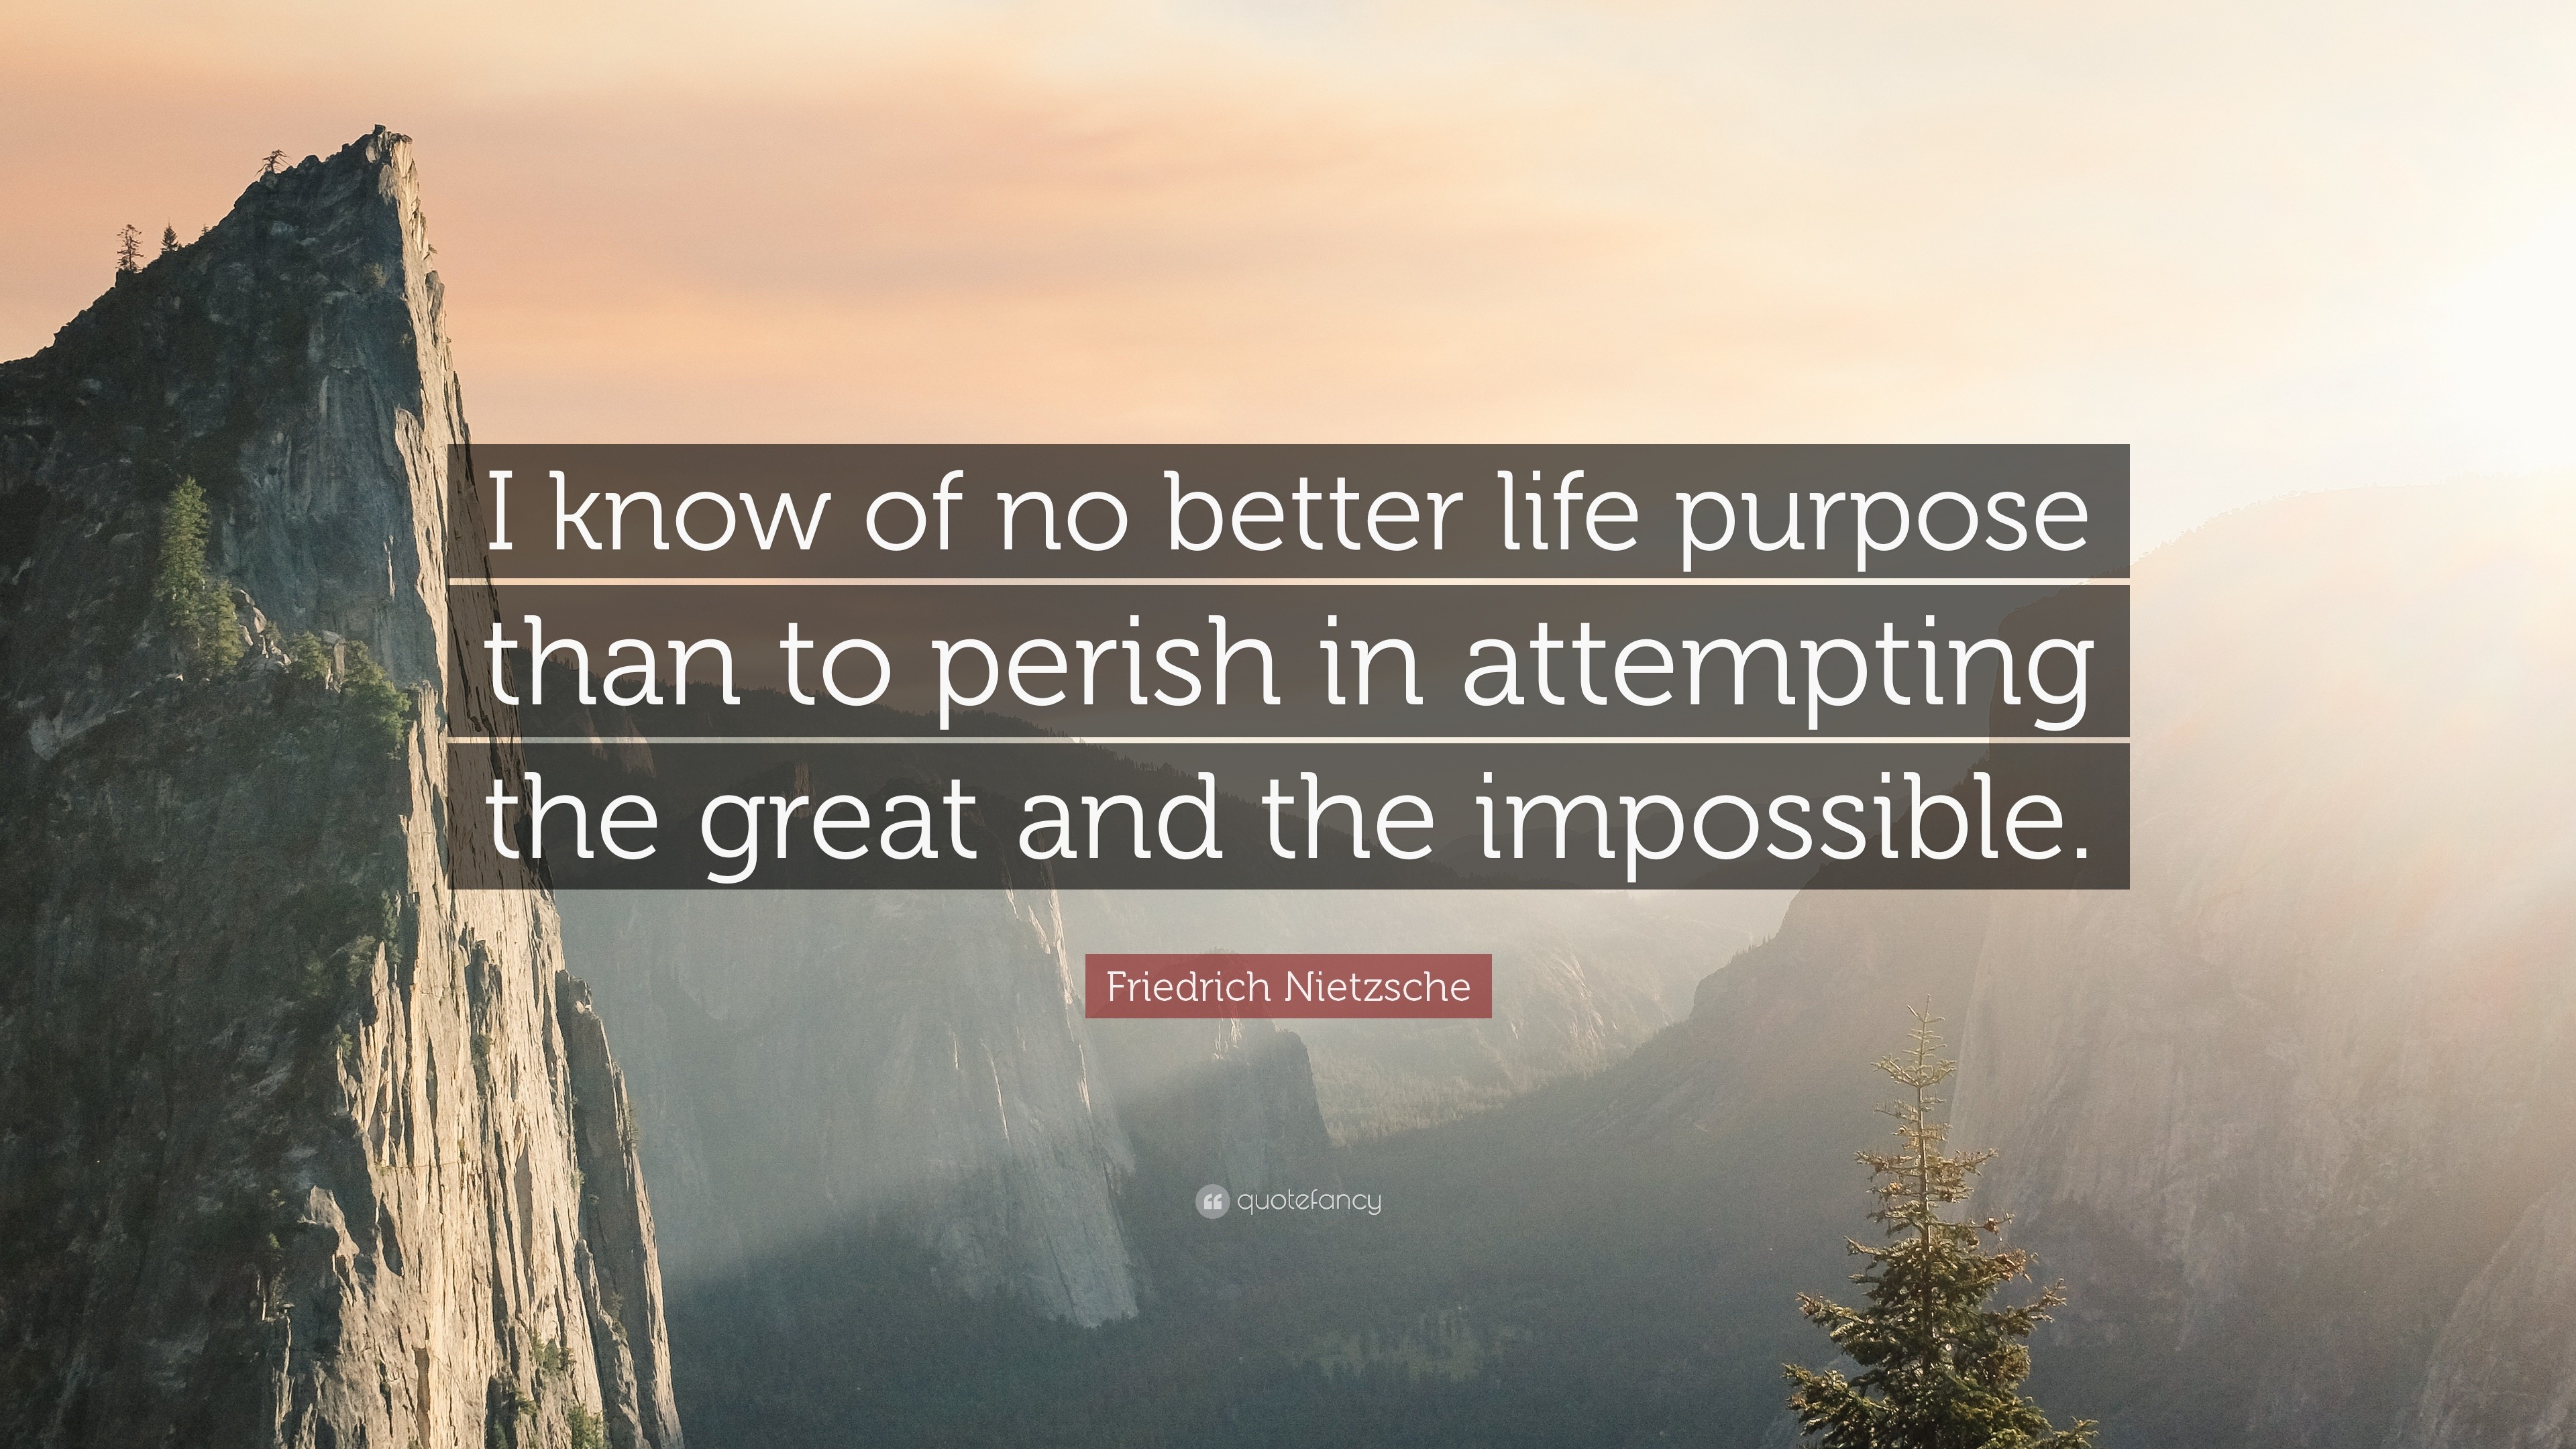 Friedrich Nietzsche Quote: “I know of no better life purpose than to ...